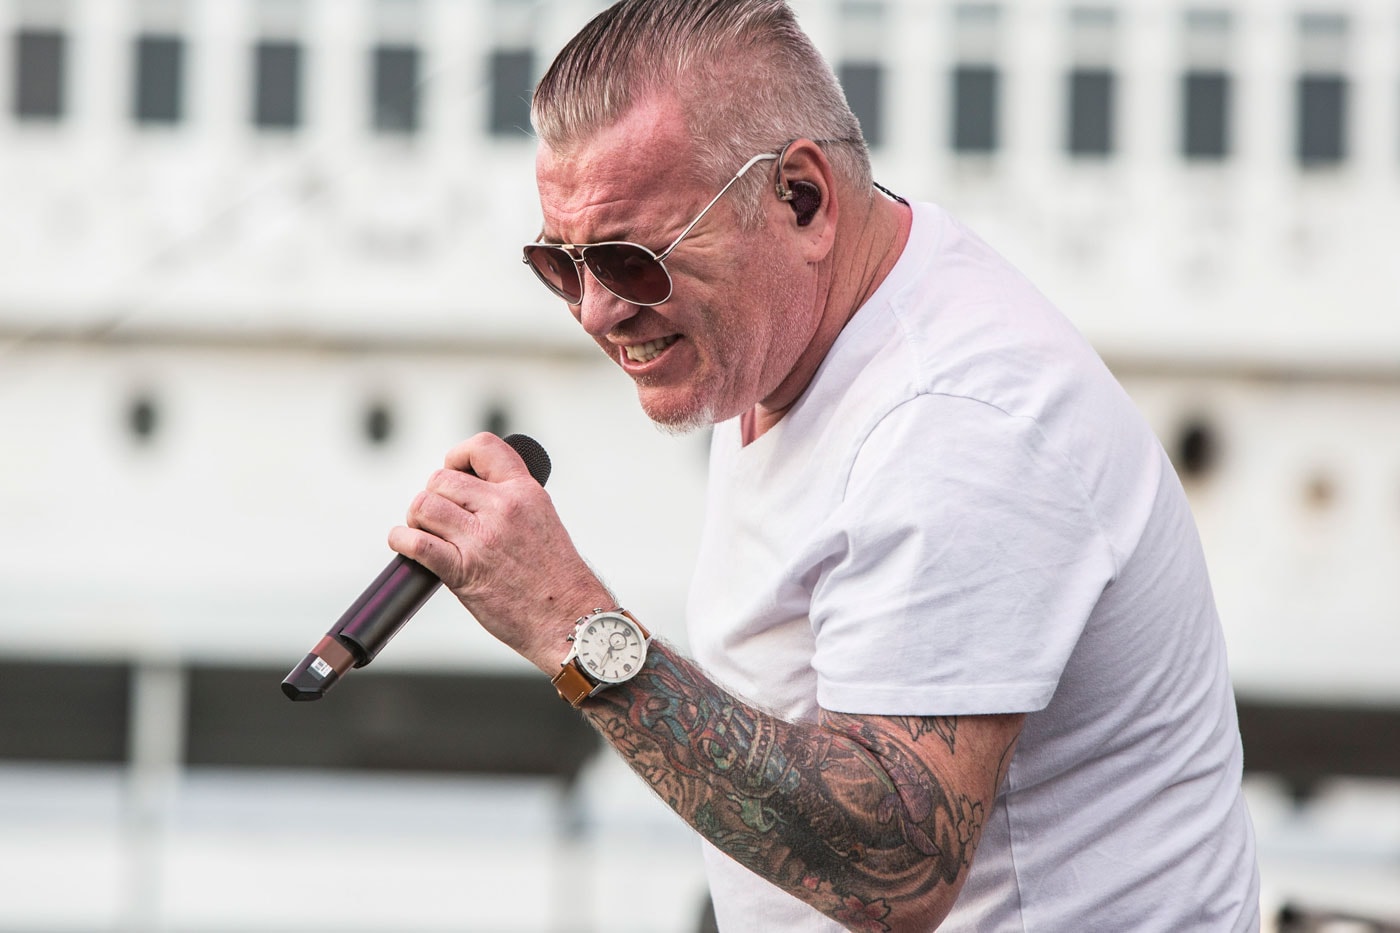 Smash Mouth singer Steve Harwell troubled performance retirement announcement new york music news 